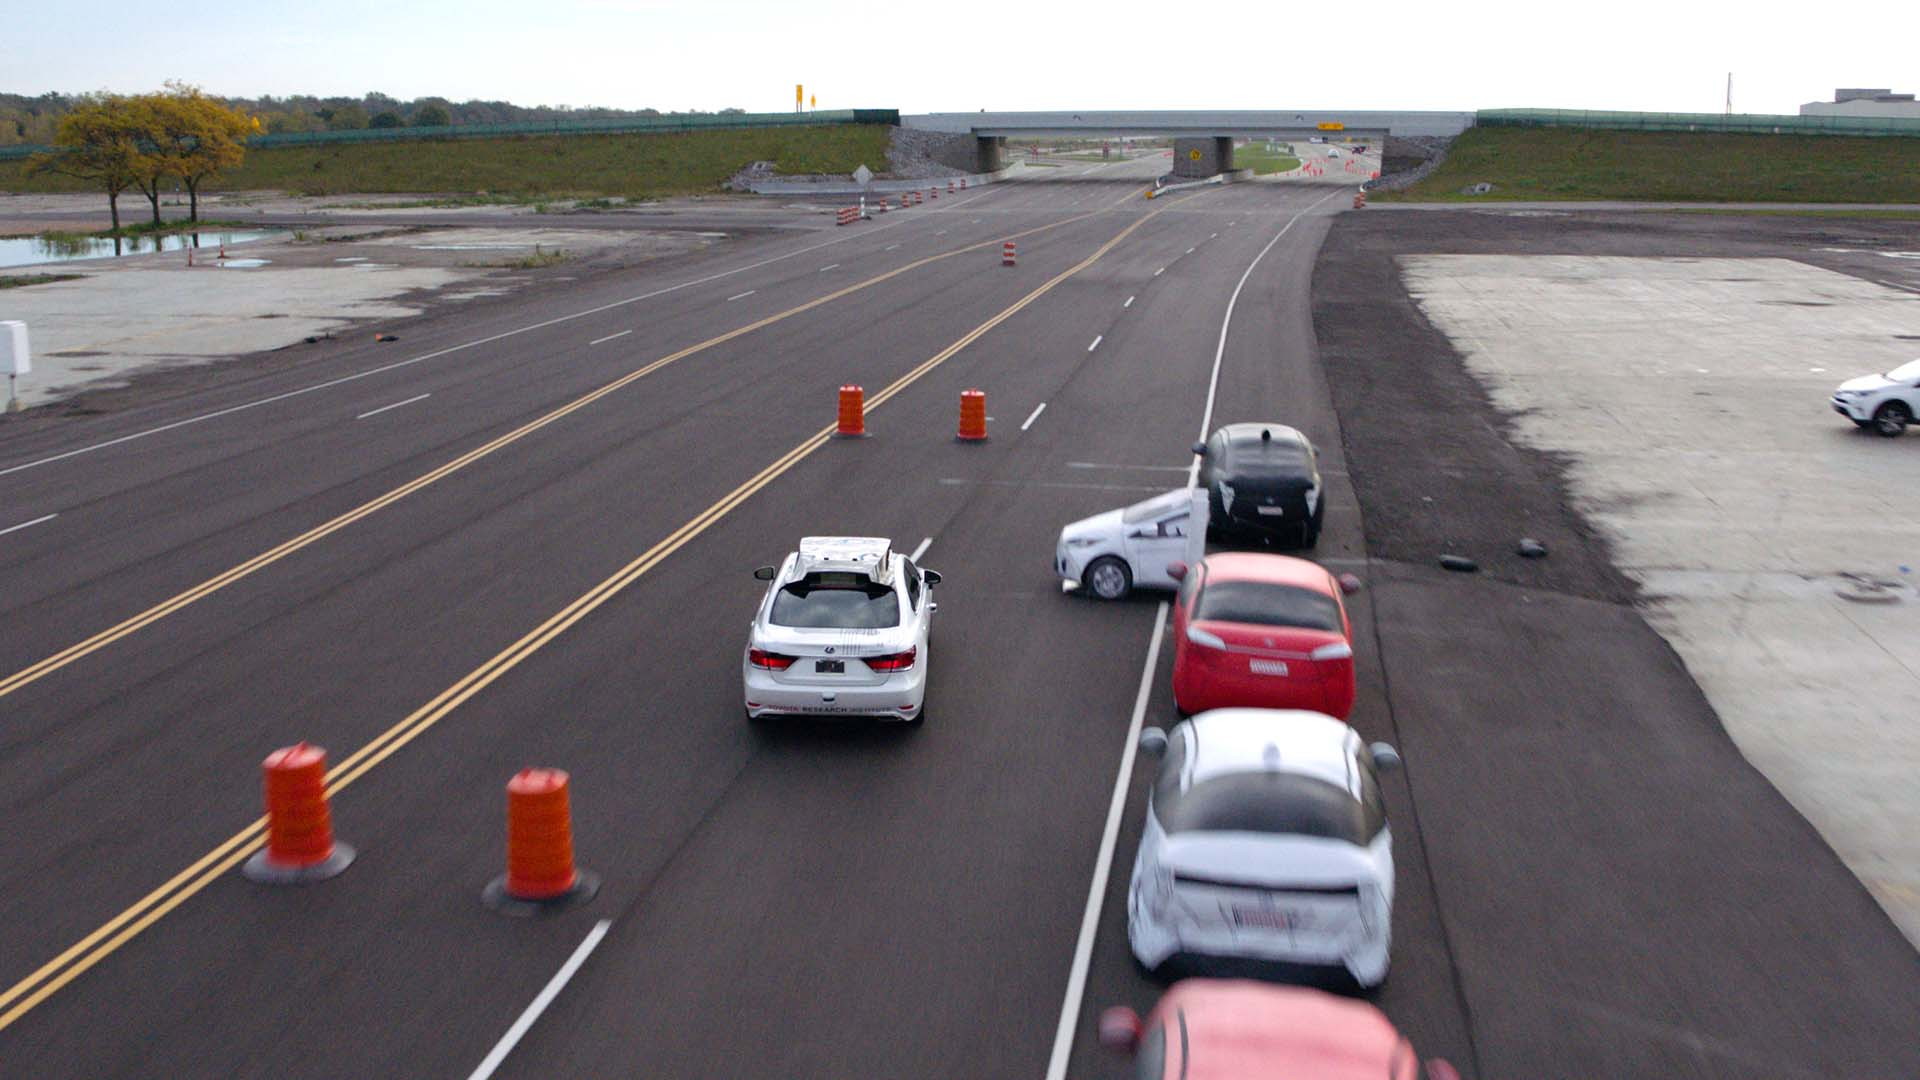 Toyota Research Institute simulation of actual 3-car crash, to test Guardian active-safety system